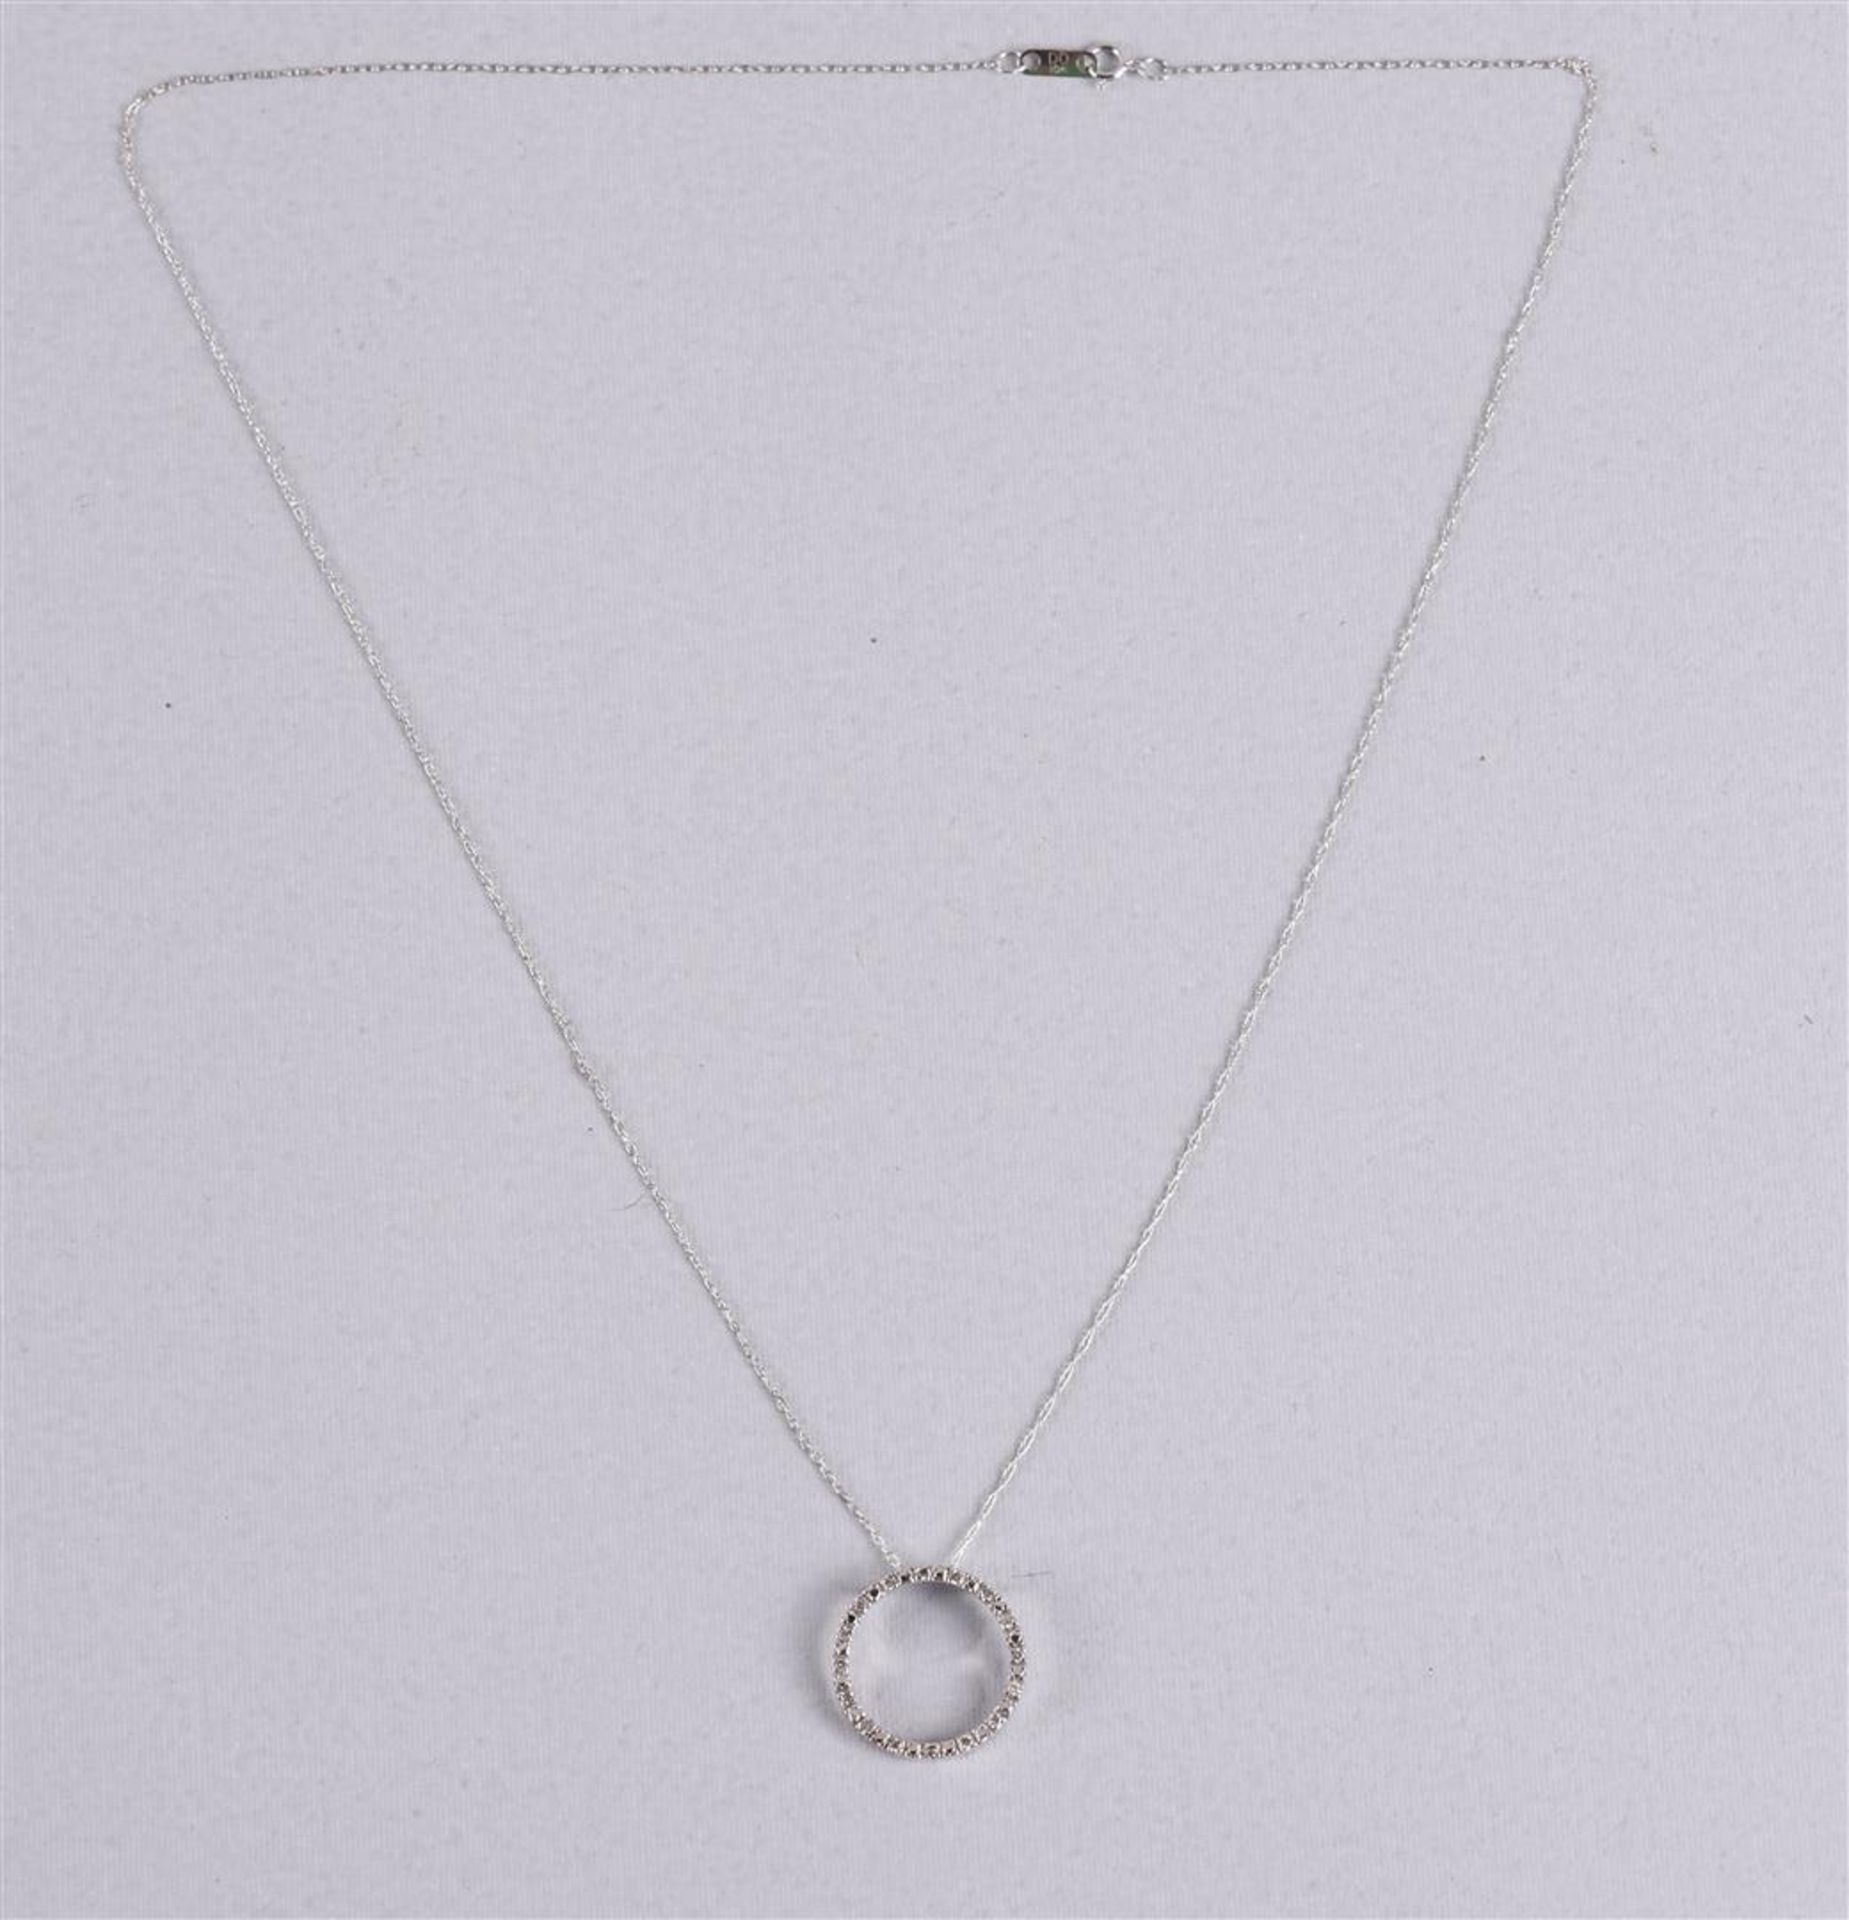 A 10 kt BWG necklace and pendant with 16 diamonds. - Image 2 of 4